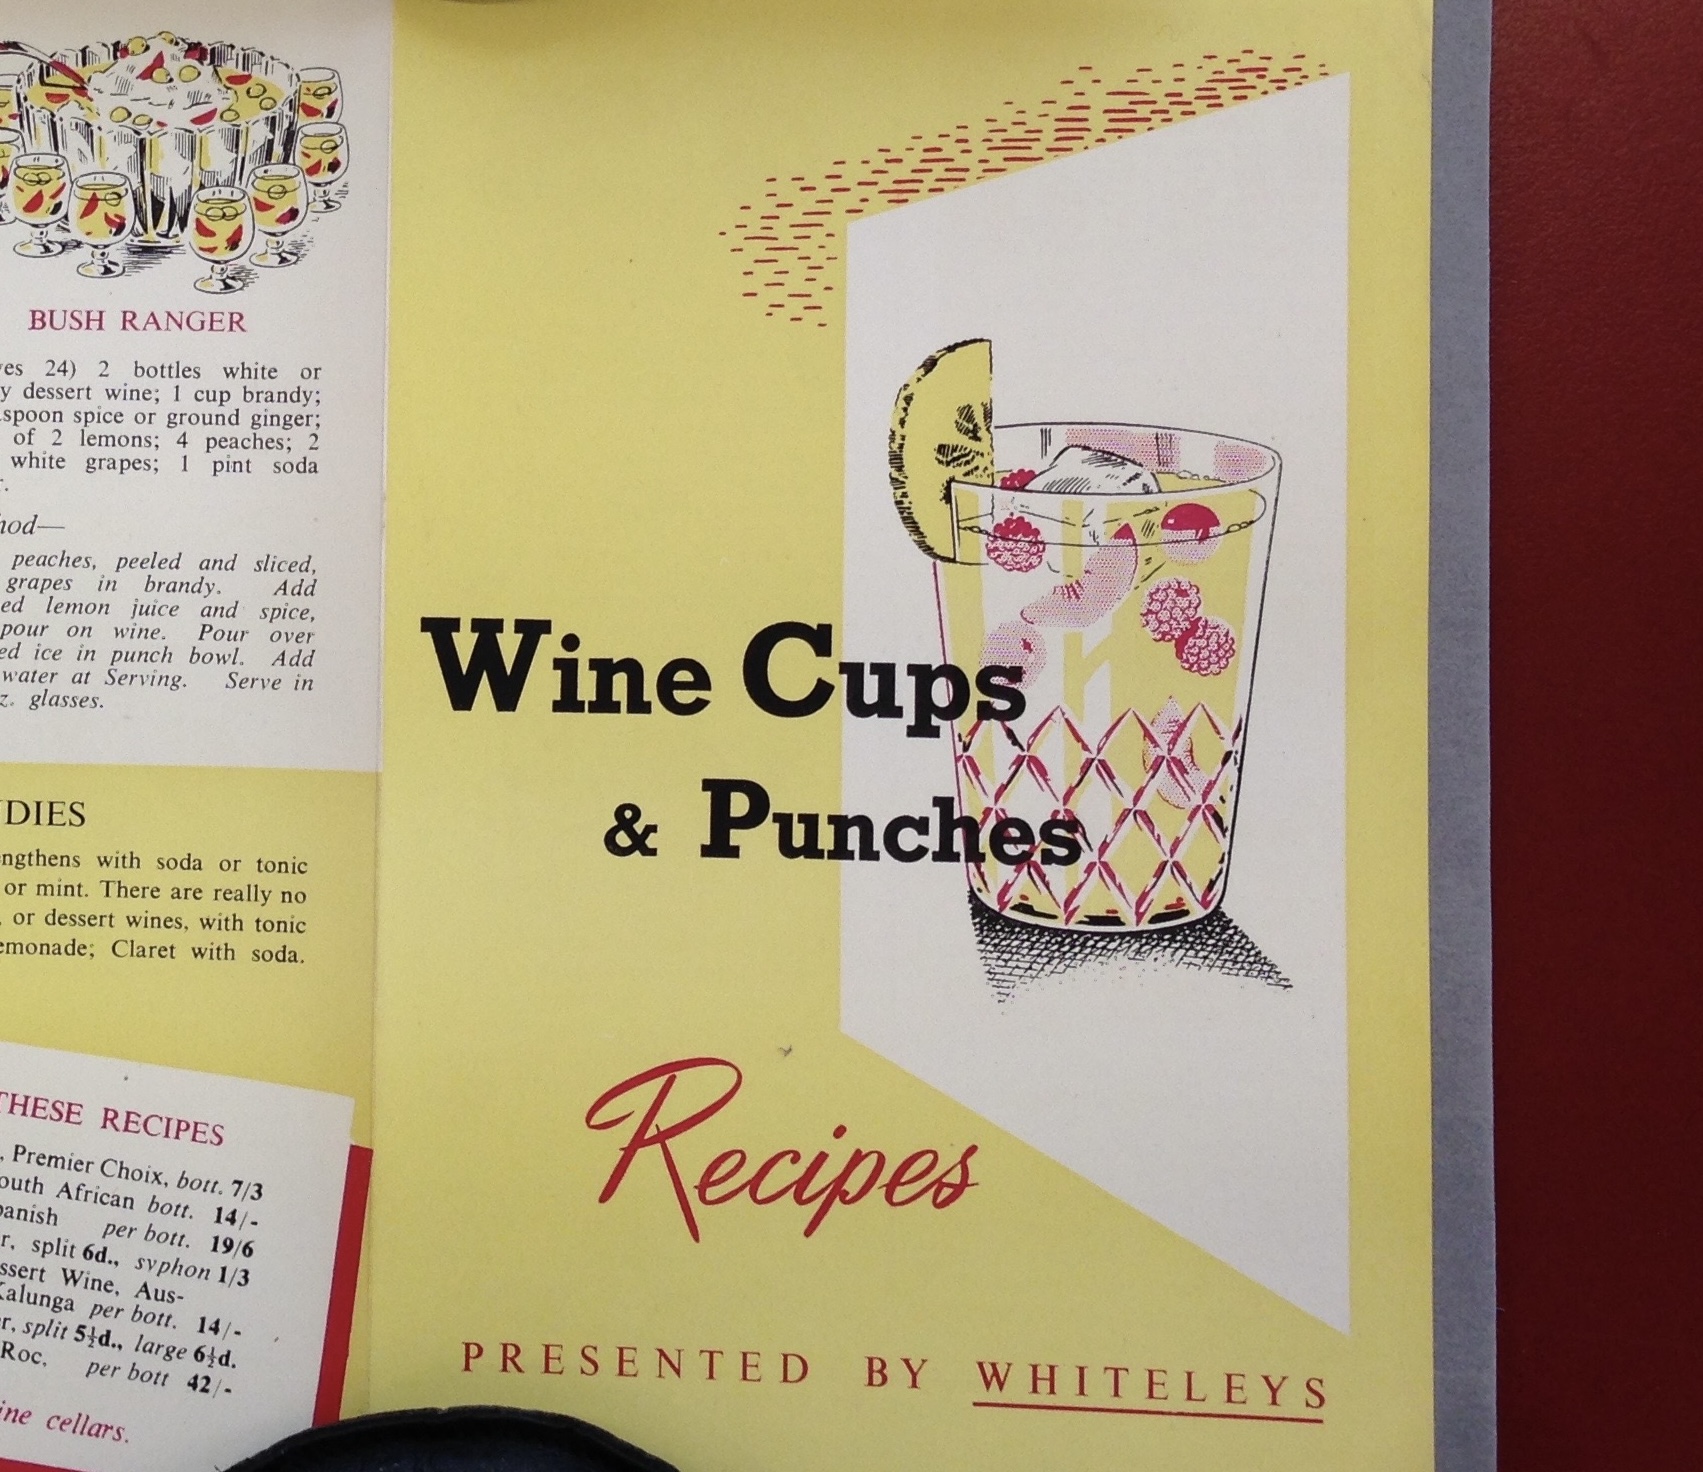 Yellow recipe page with text 'Wine Cups & Punches Recipes Presented by Whiteleys' and an illustration of a glass of punch with fruit in it.